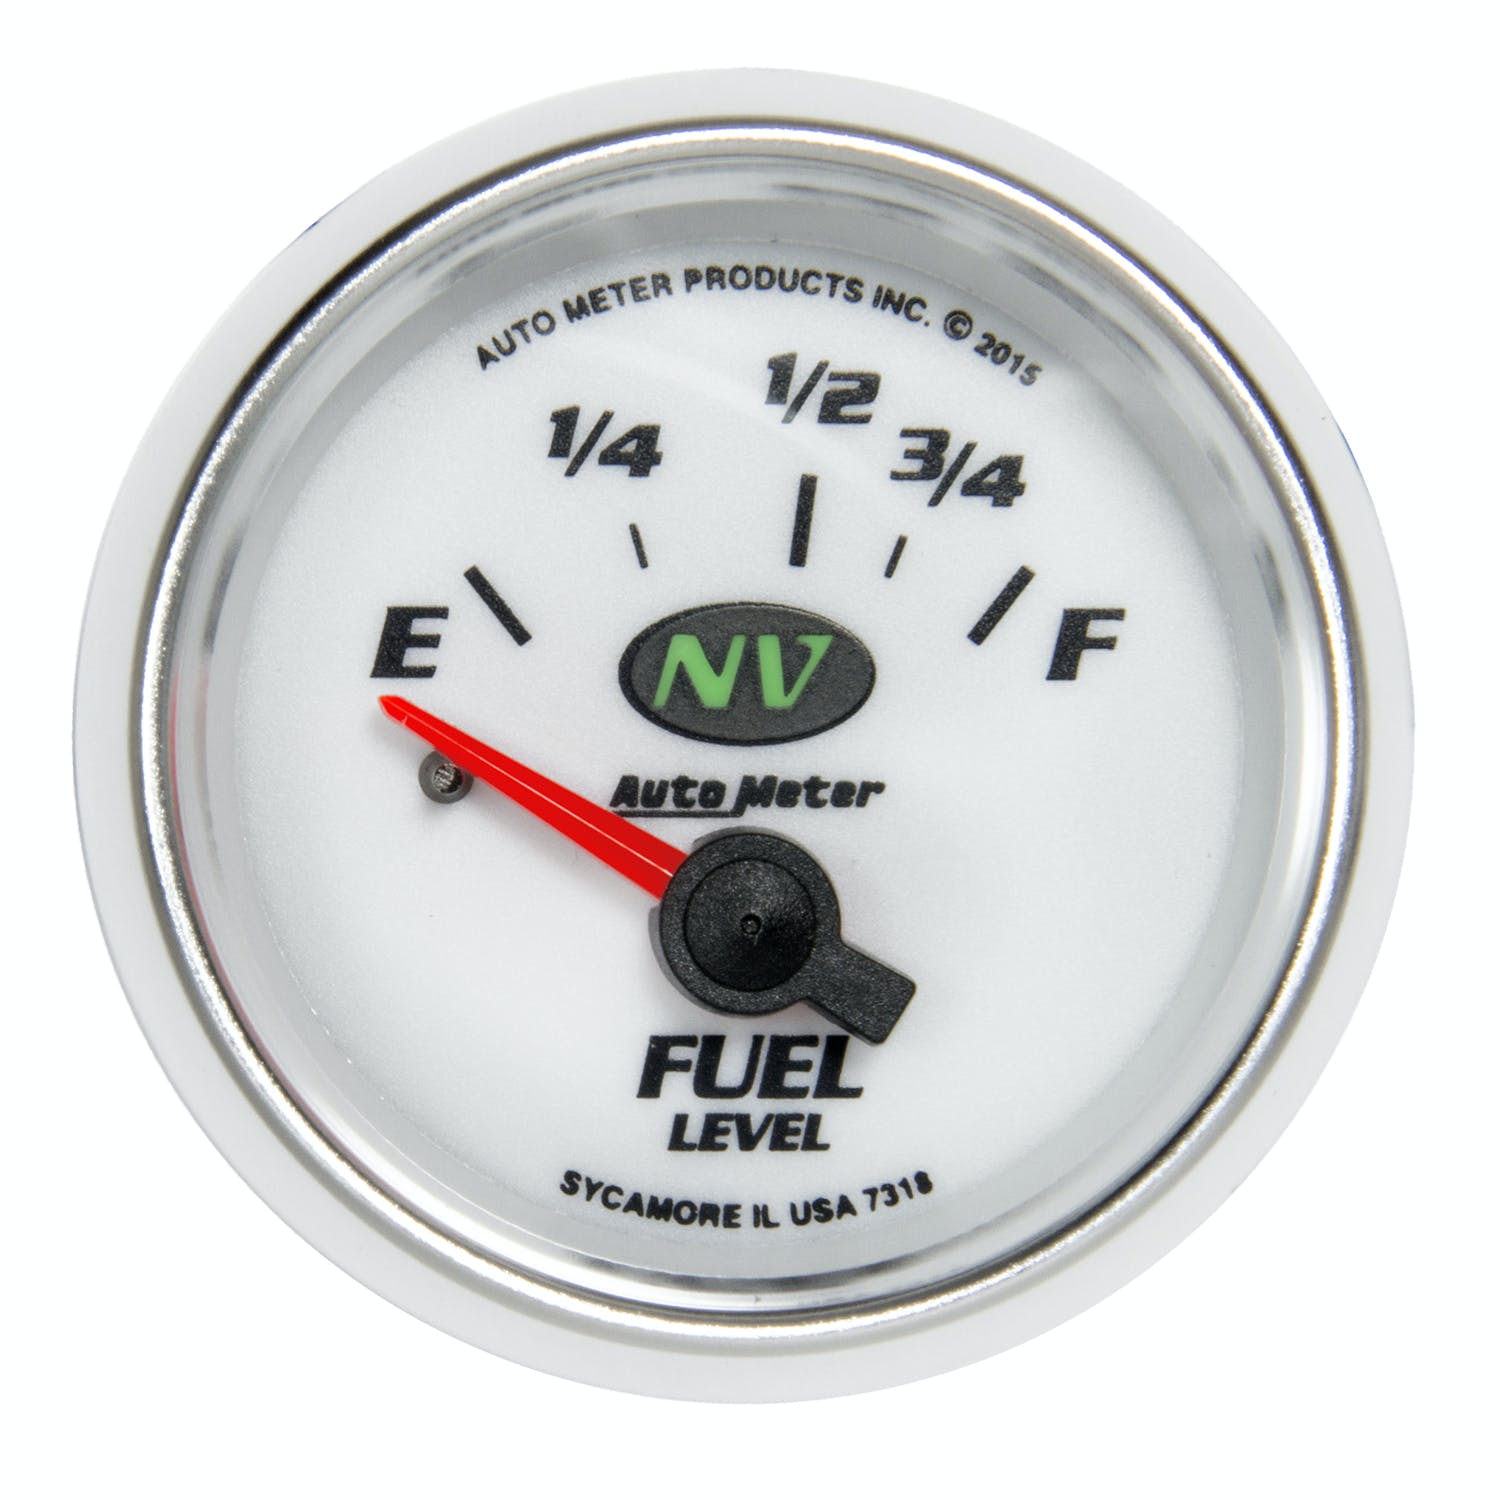 AutoMeter Products 7318 Fuel Level Gauge 2 1/16, 16E - 158F Electric NV